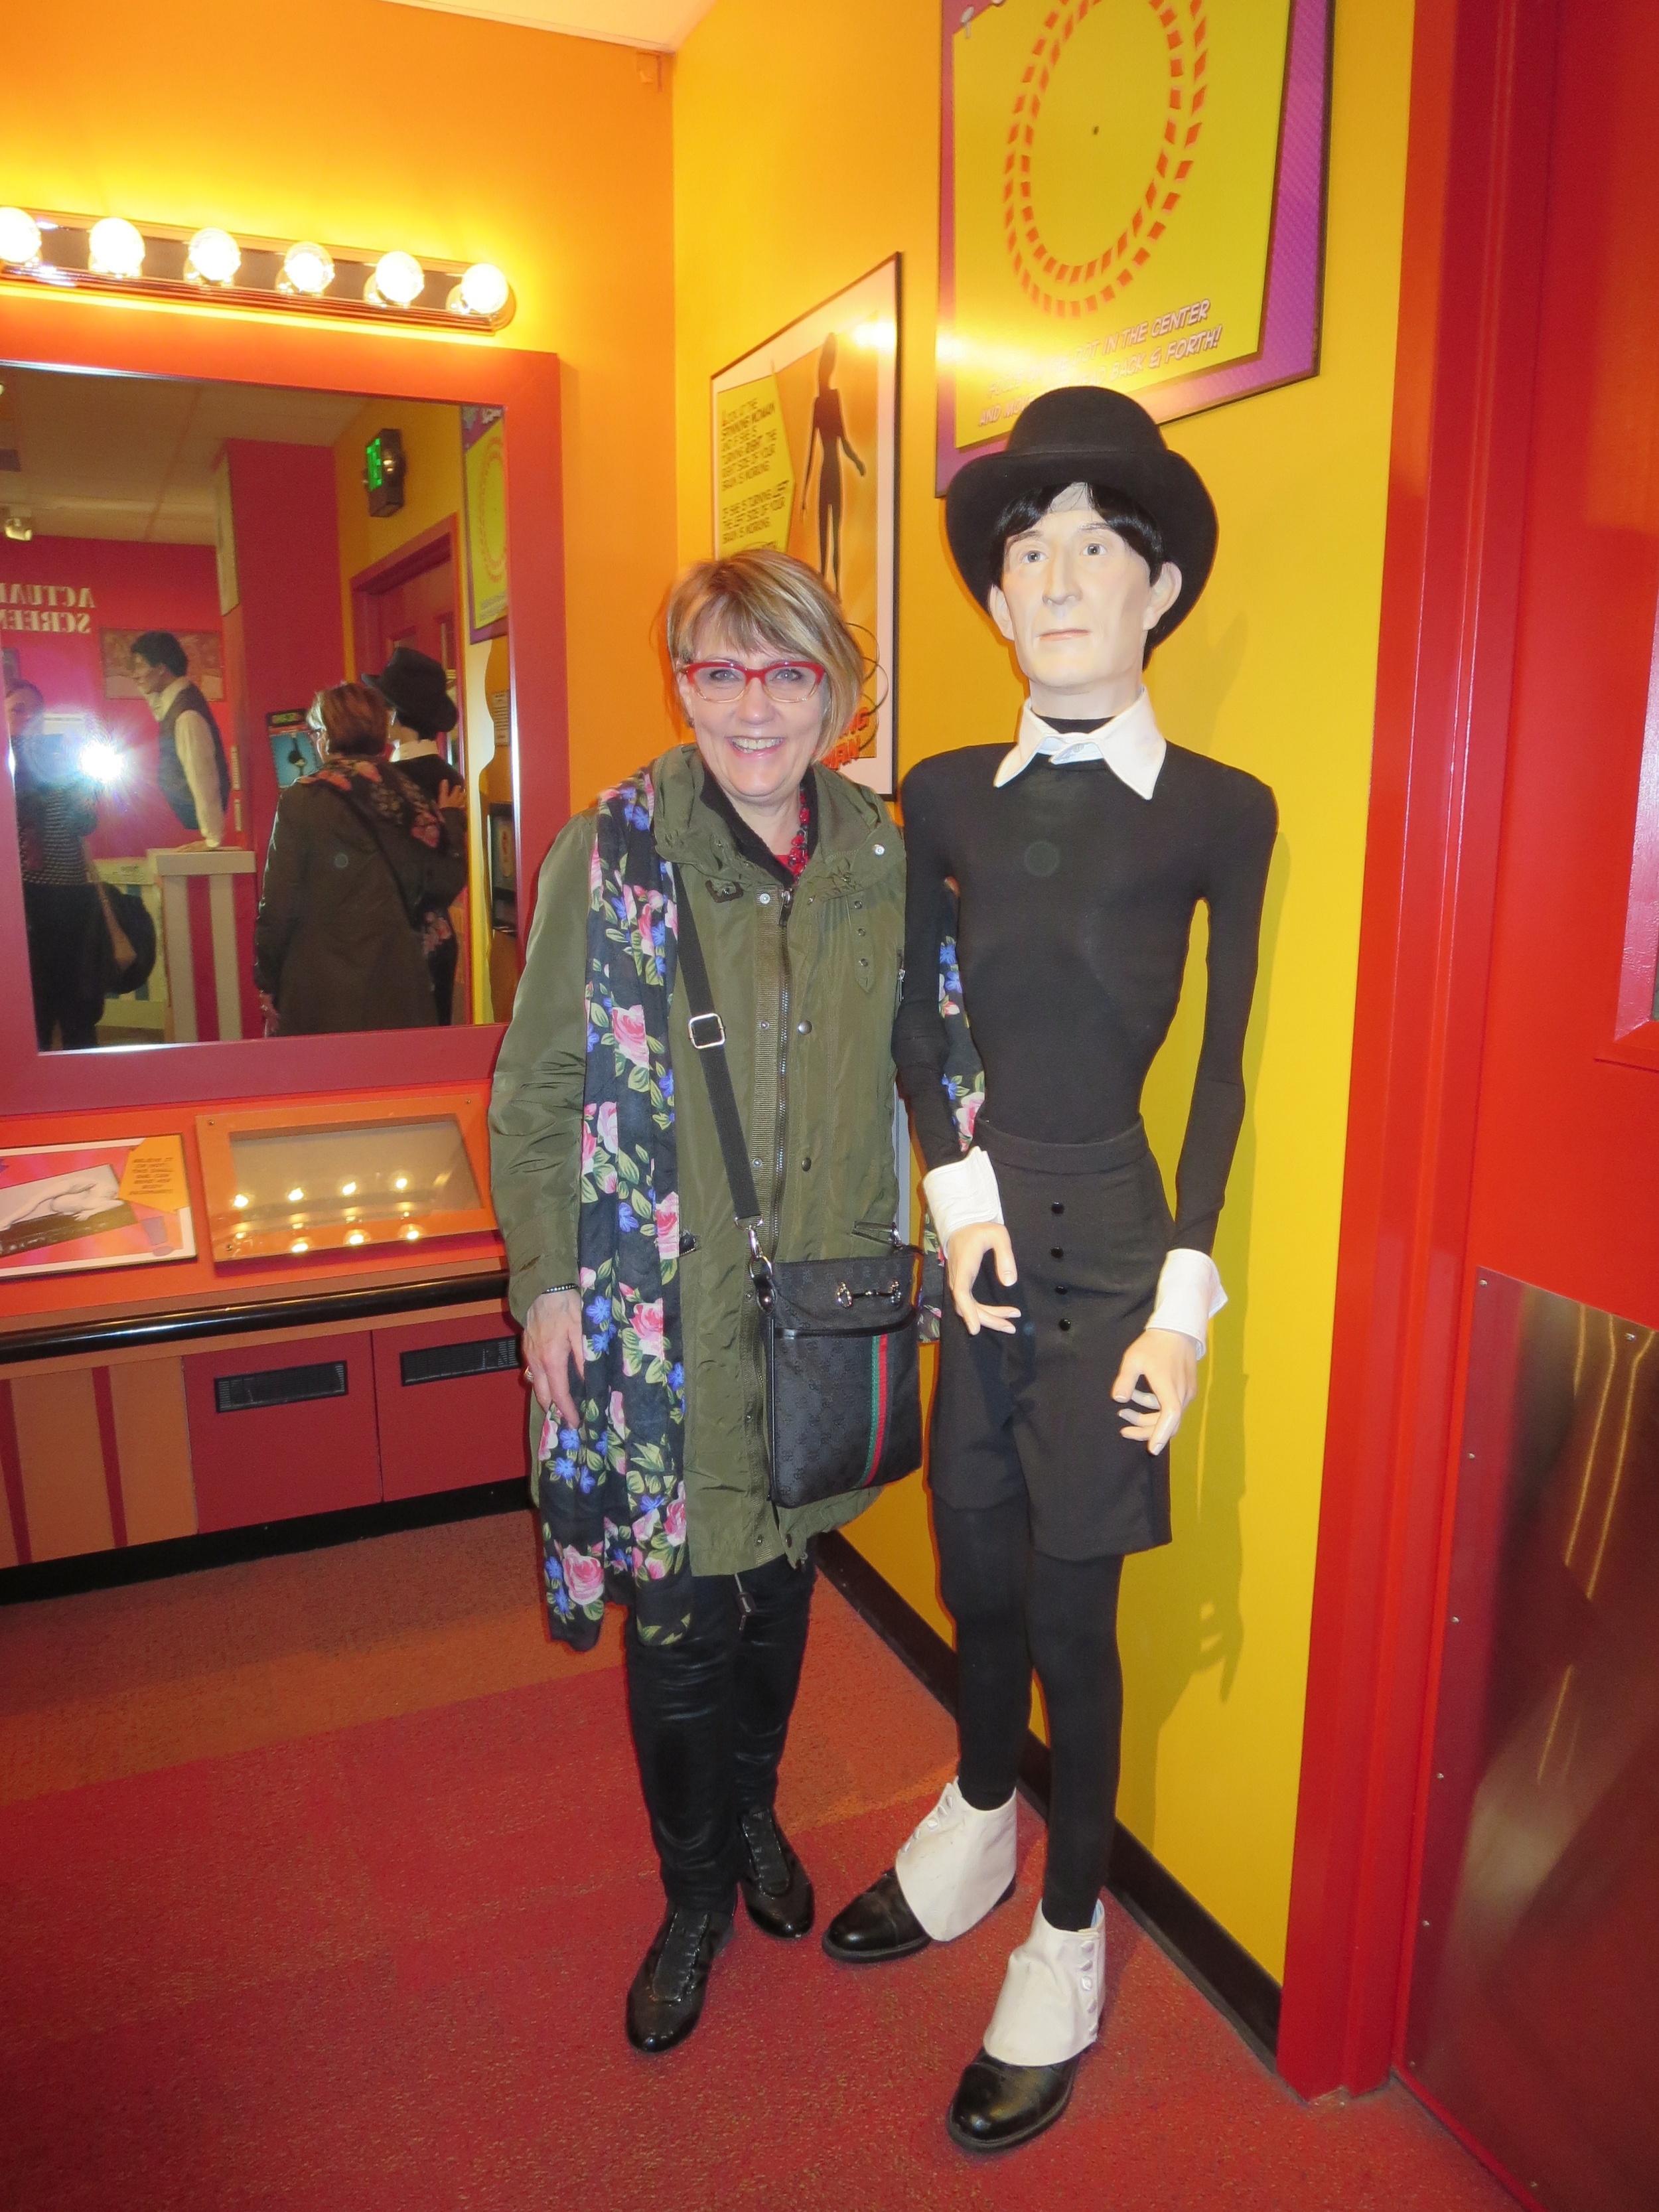 Ditta found the thinnest man - not wanting to imitate that